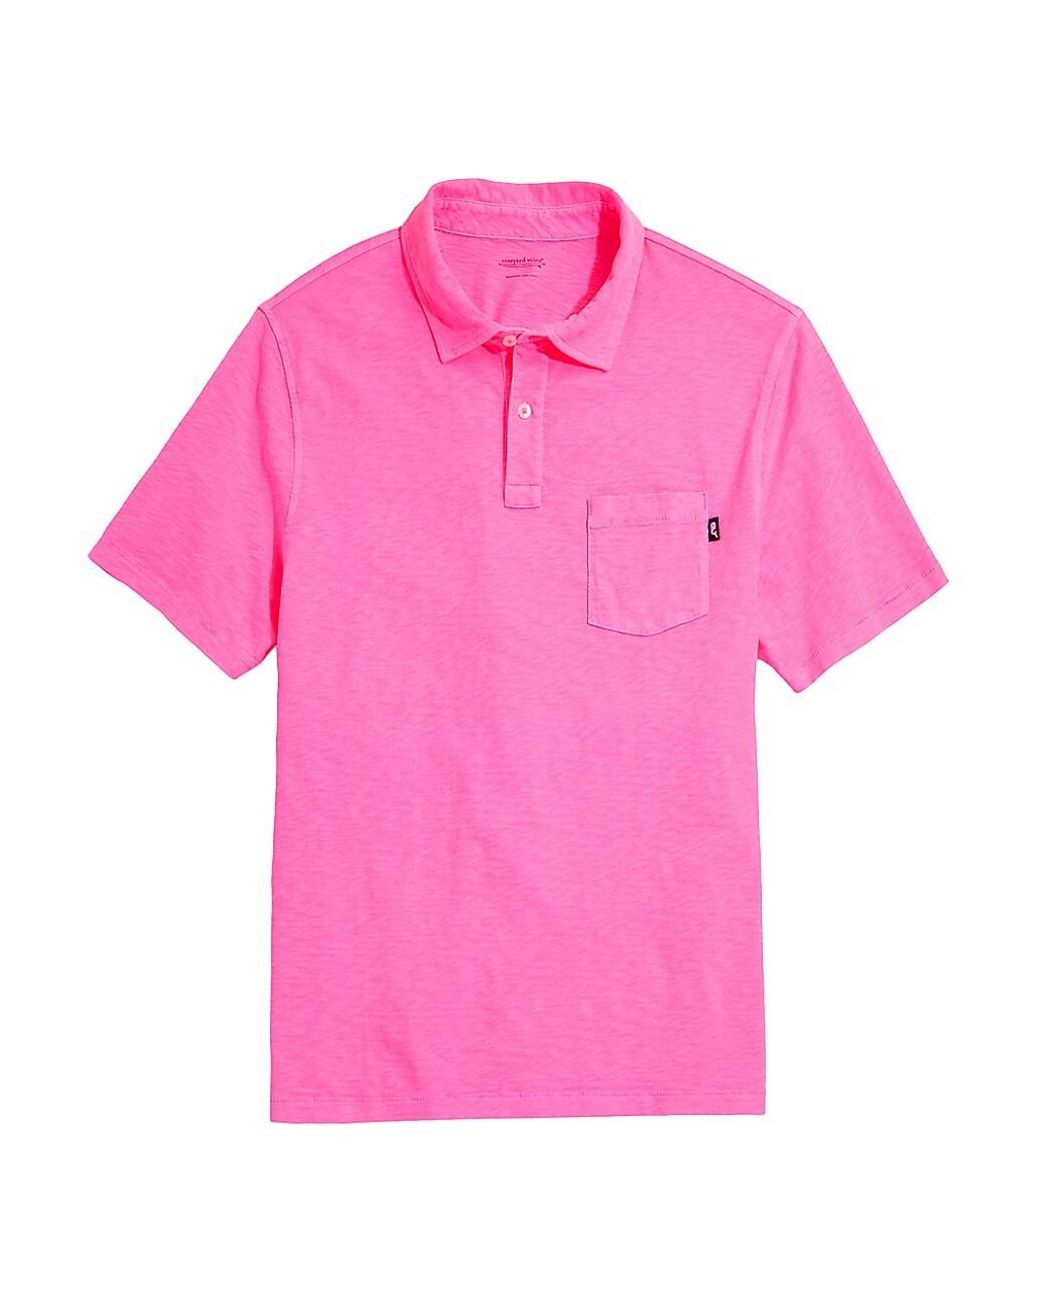 Vineyard Vines Cotton Island Garment-dyed Polo Shirt in Pink for Men | Lyst